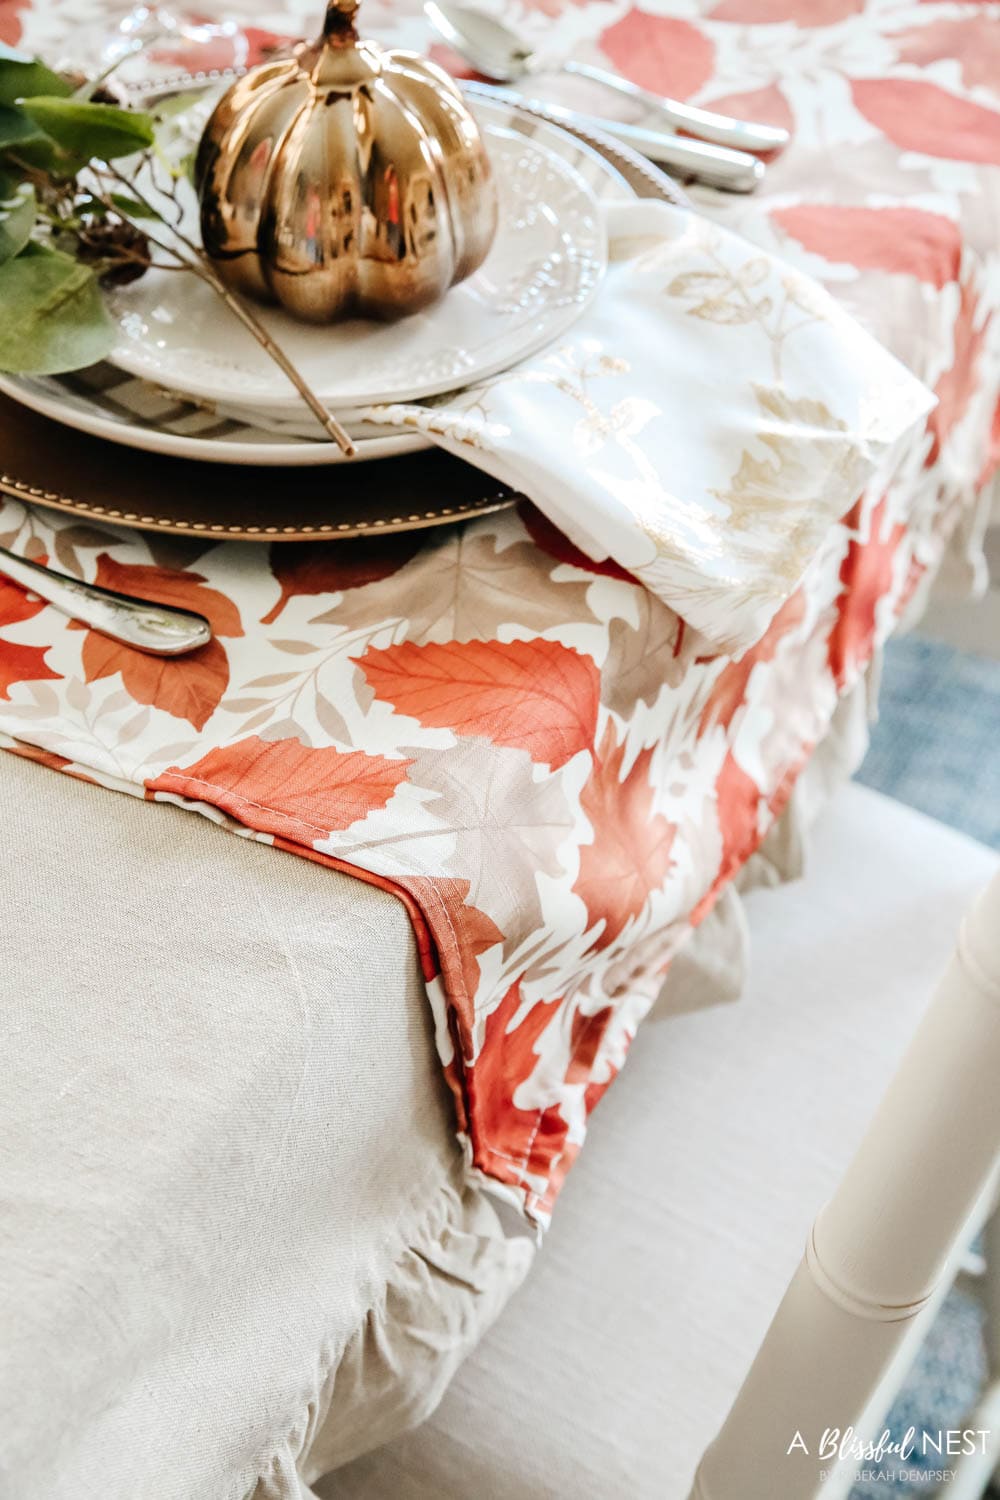 Layered linens in shades of orange and taupe